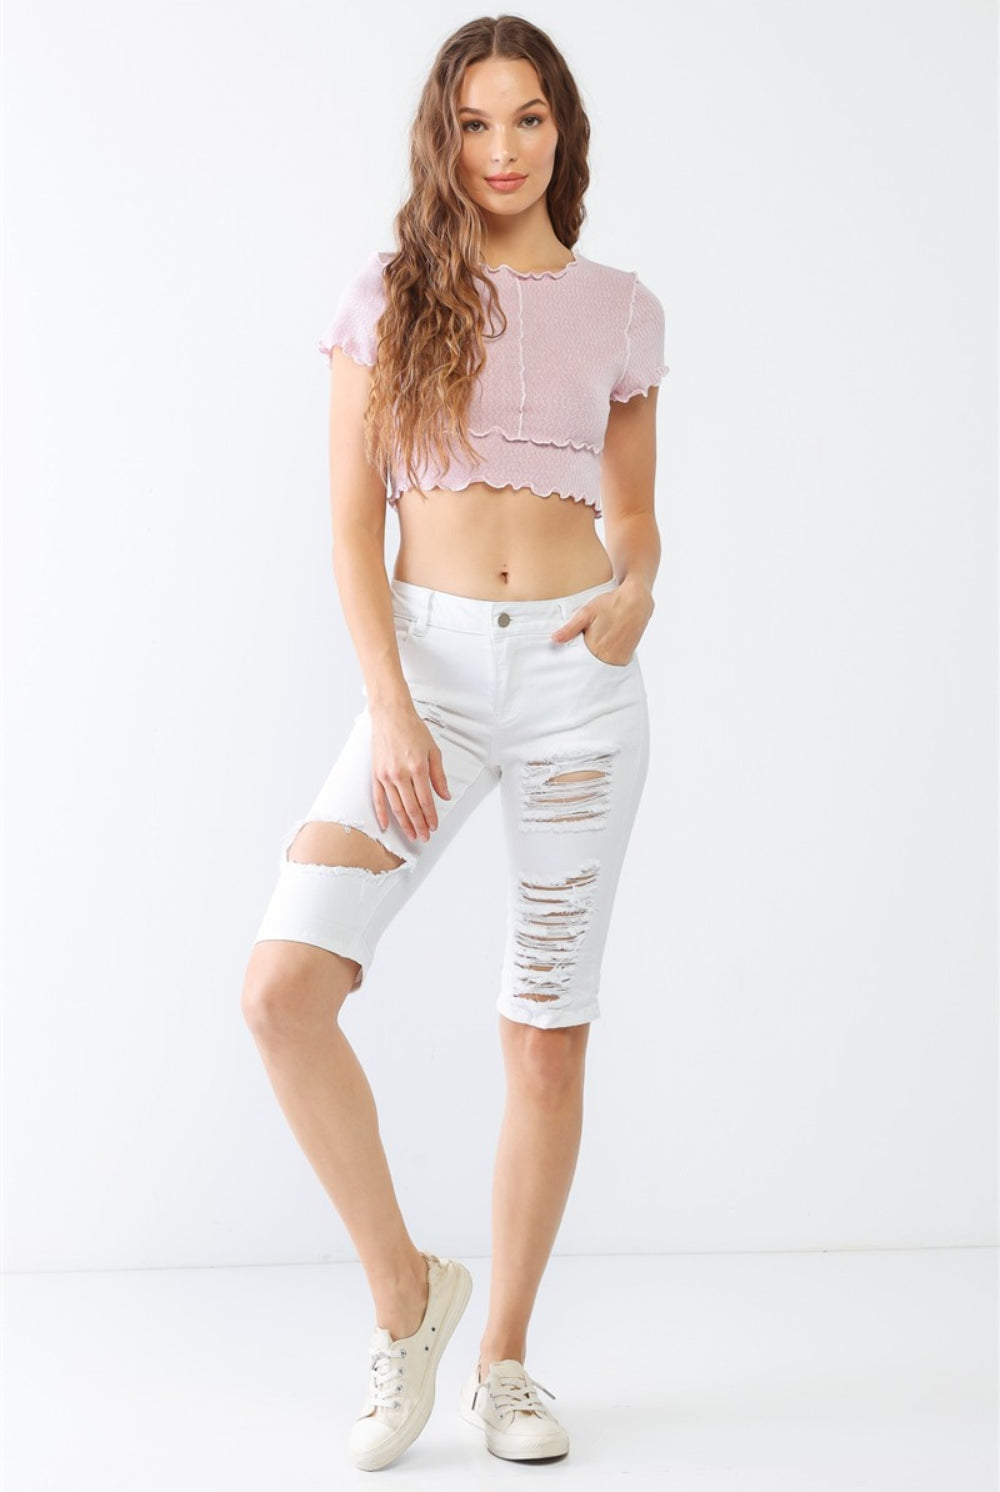 A model wearing white distressed bermuda denim shorts, styled for a chic and casual summer look.